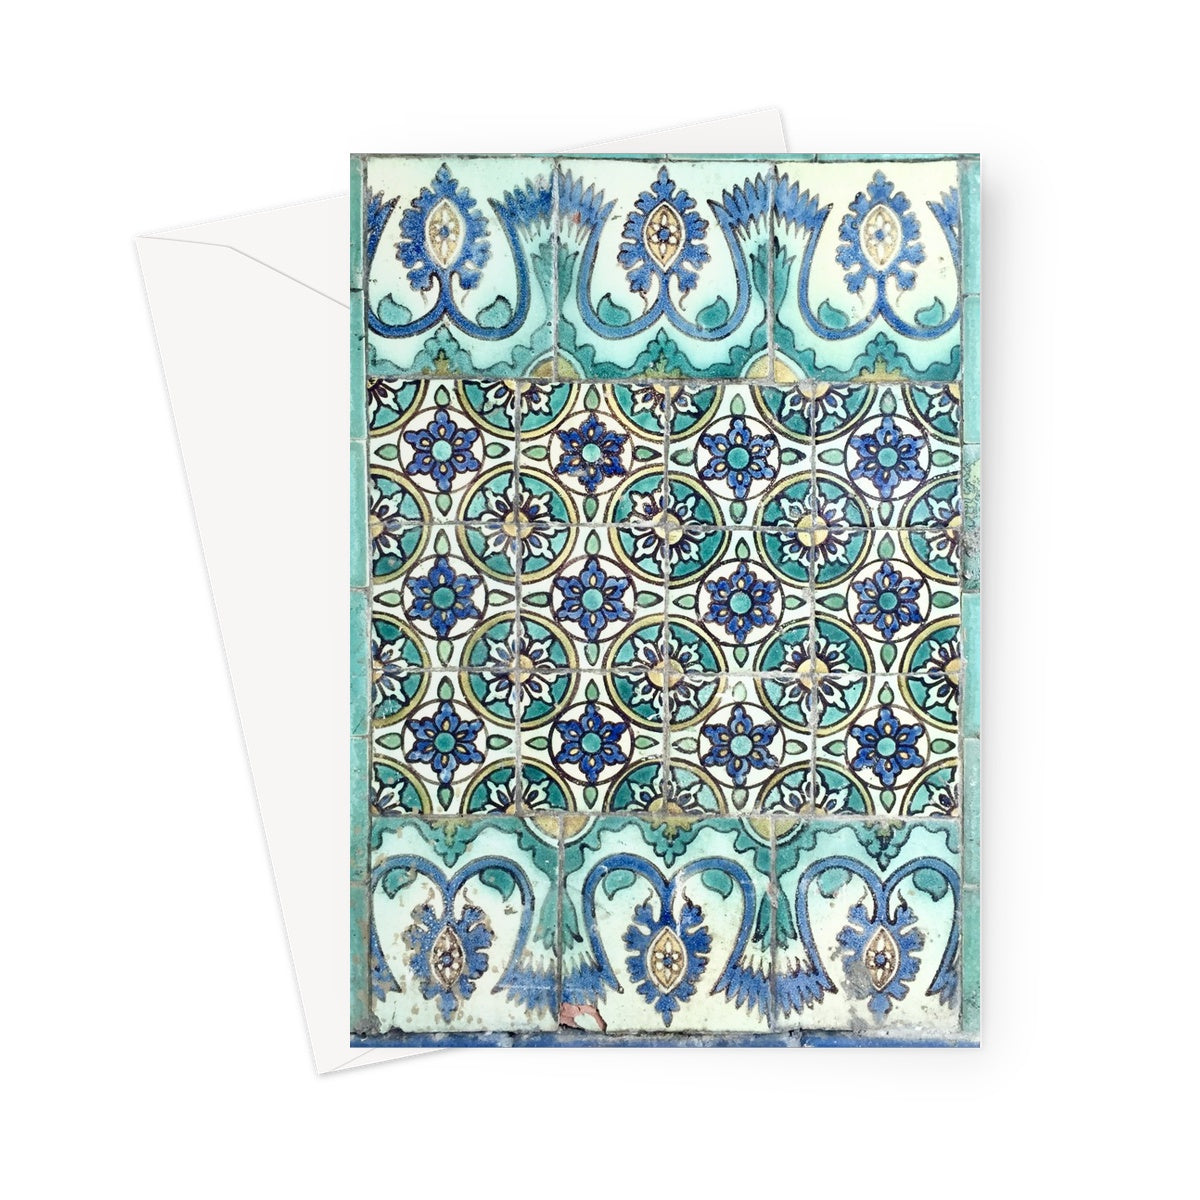 Detail of floor tiles from Biltmore Hotel, Miami showing blues and turquoises in circles and stylised flower shapes in this greeting card